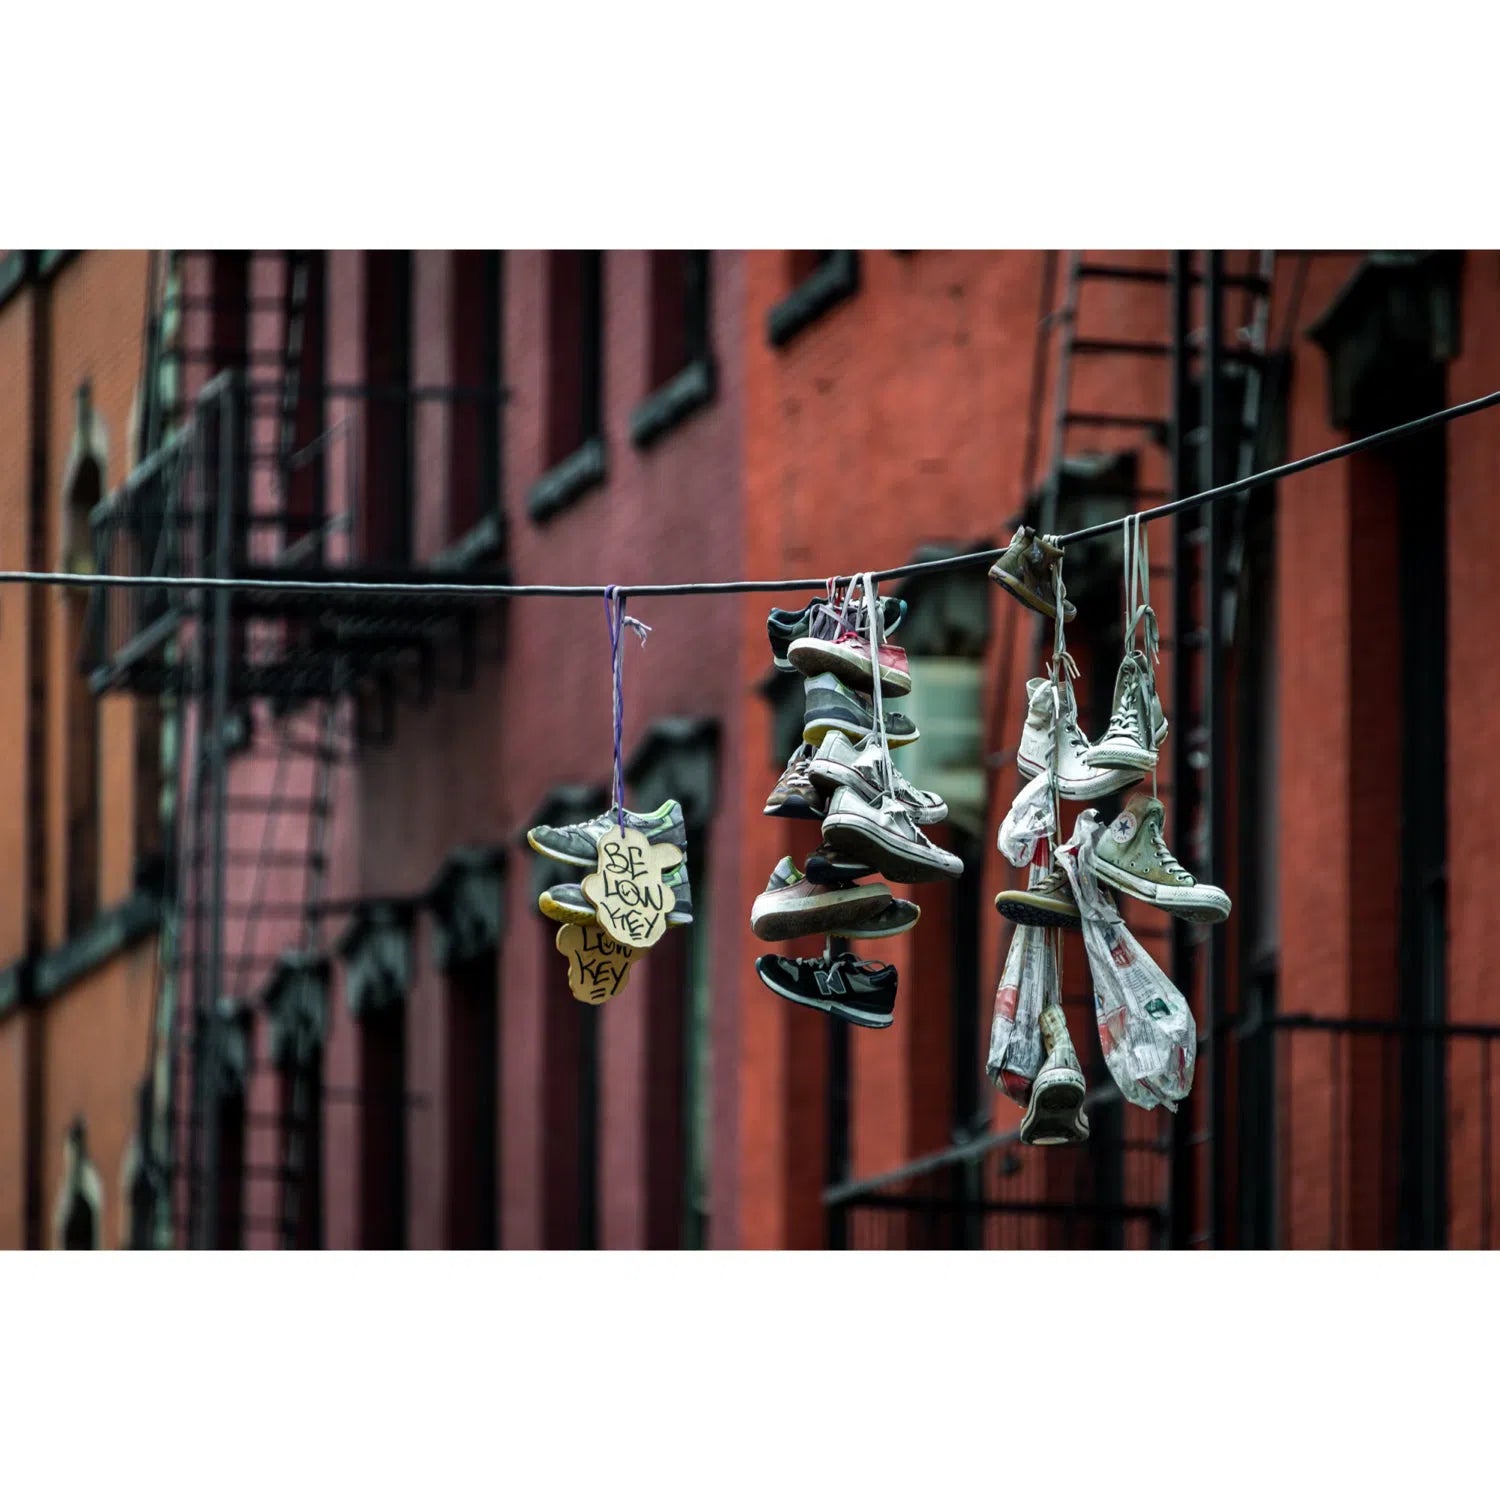 Shoes in New York-Imagesdartistes